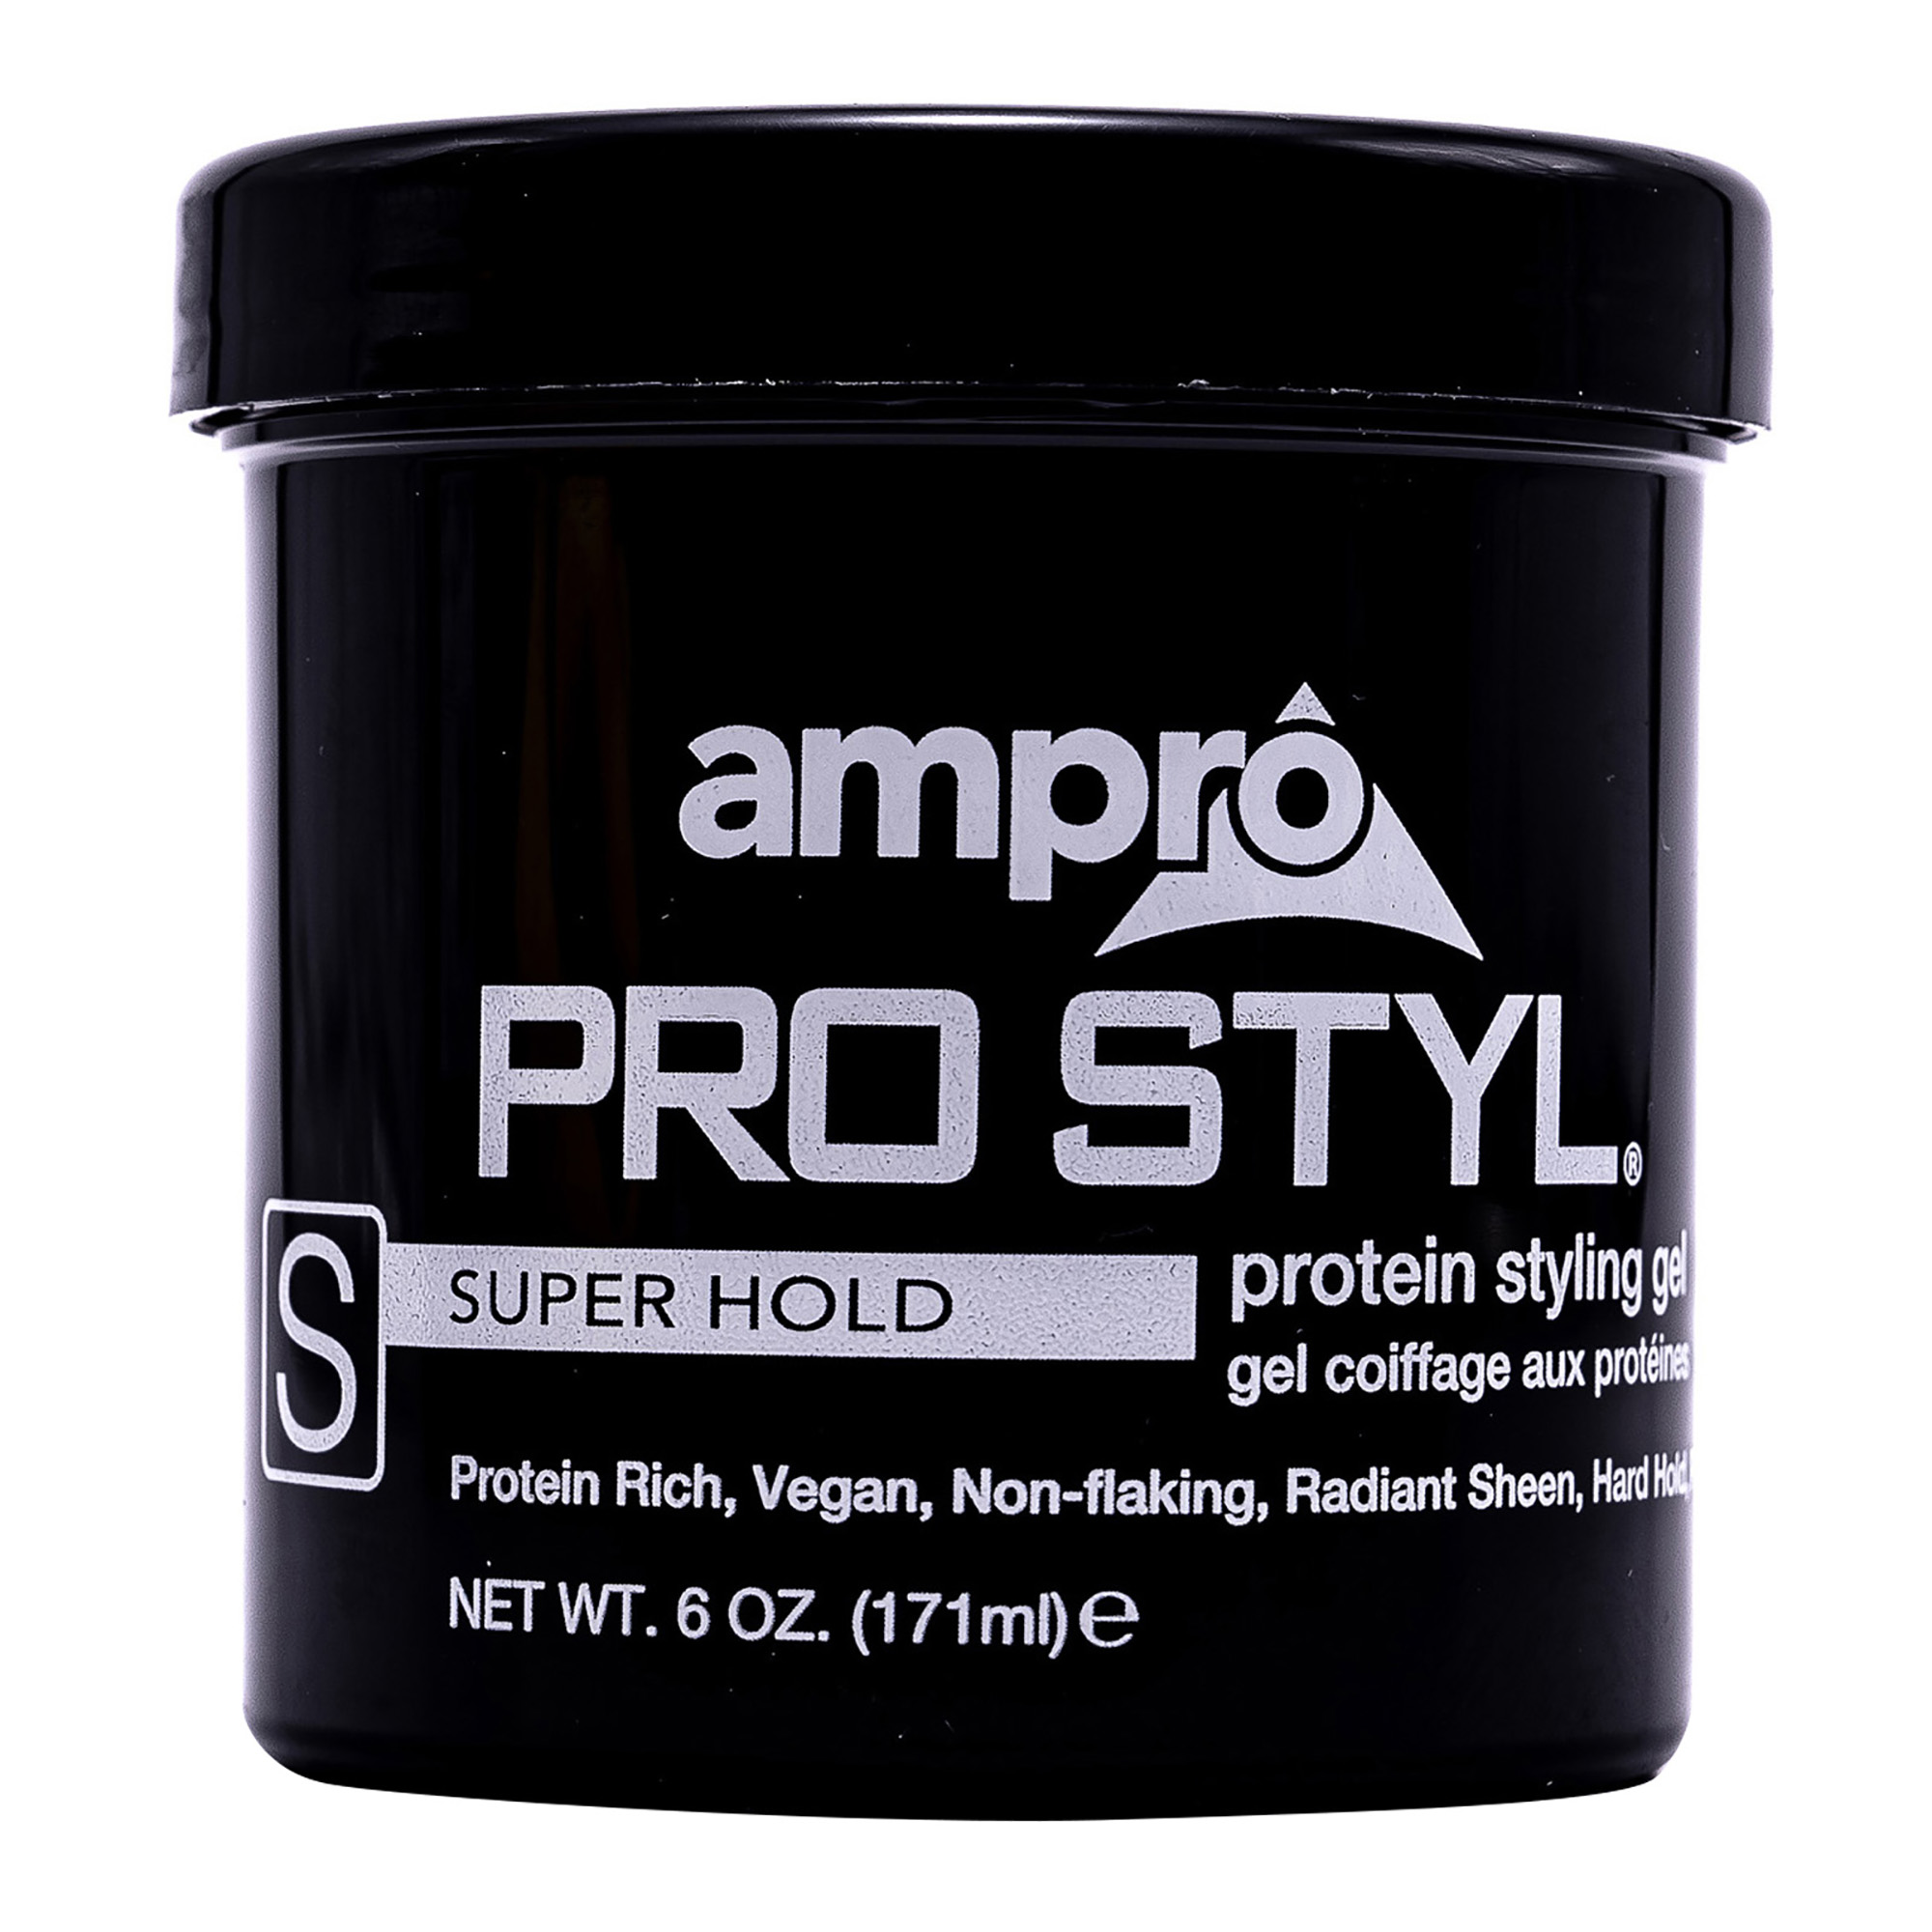 Ampro Pro Styl Protein Gel, Super Hold, 6 oz - image 1 of 2